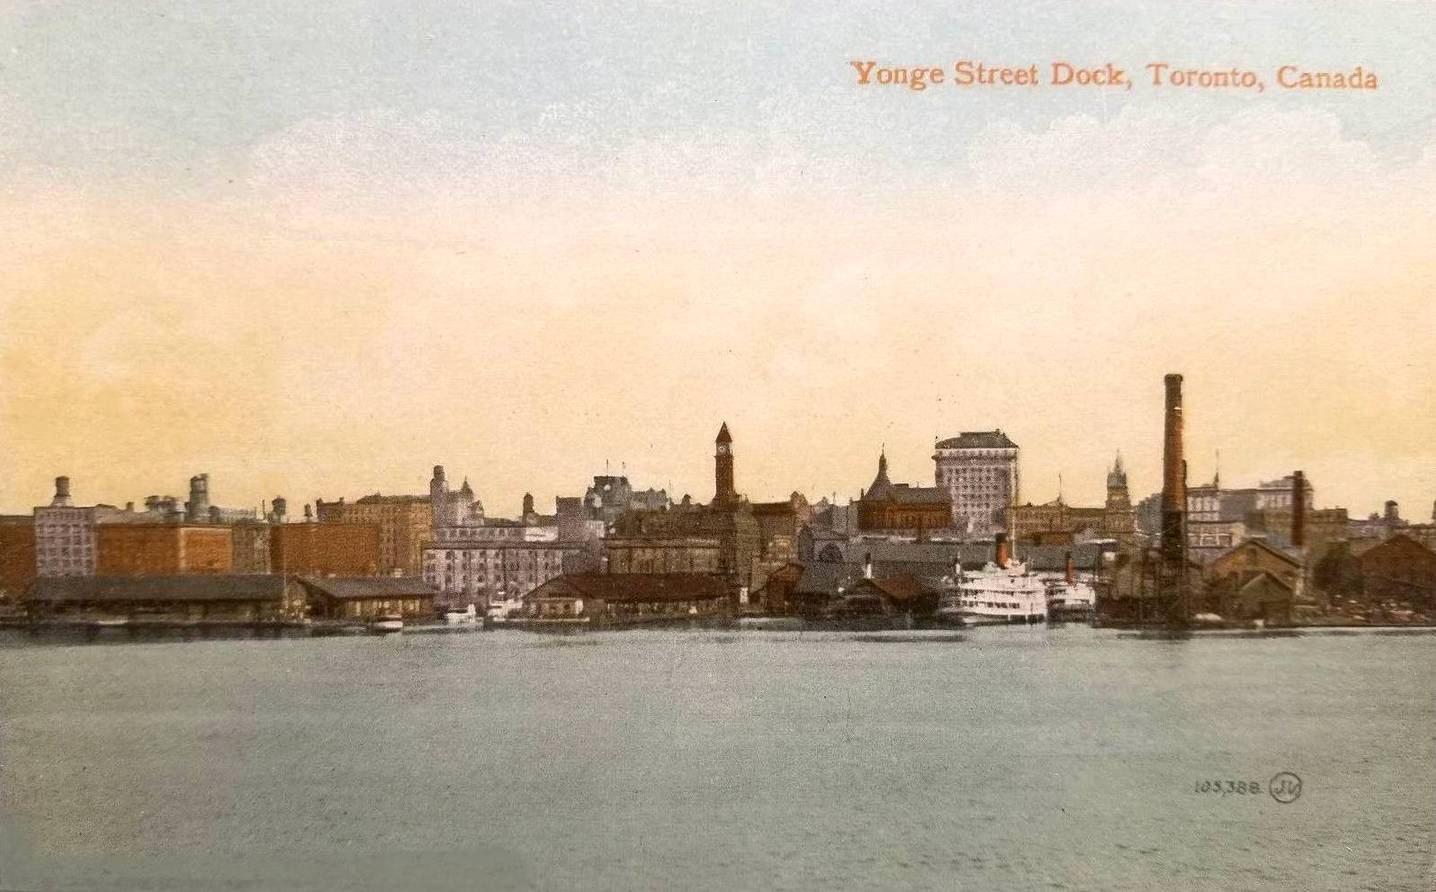 A POSTCARD - TORONTO - YONGE STREET DOCK AND SKYLINE - SEEN AT WATER LEVEL FROM A DISTANCE OUT ON LAKE - TINTED - 1910s